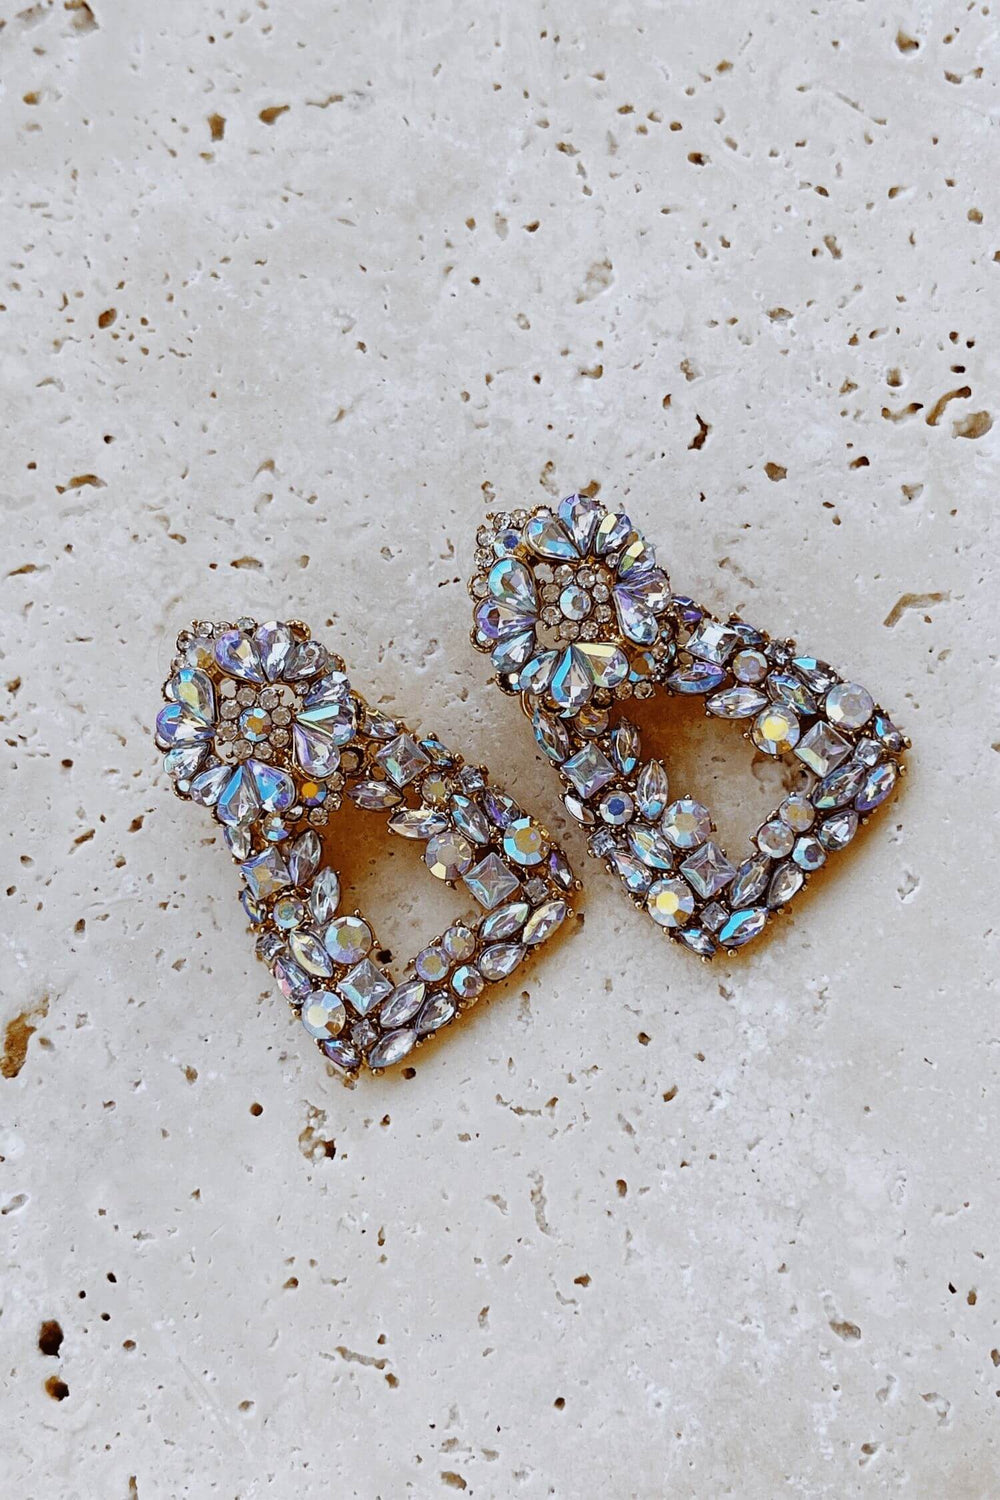 Bianca Gold Iridescent Crystal Earrings